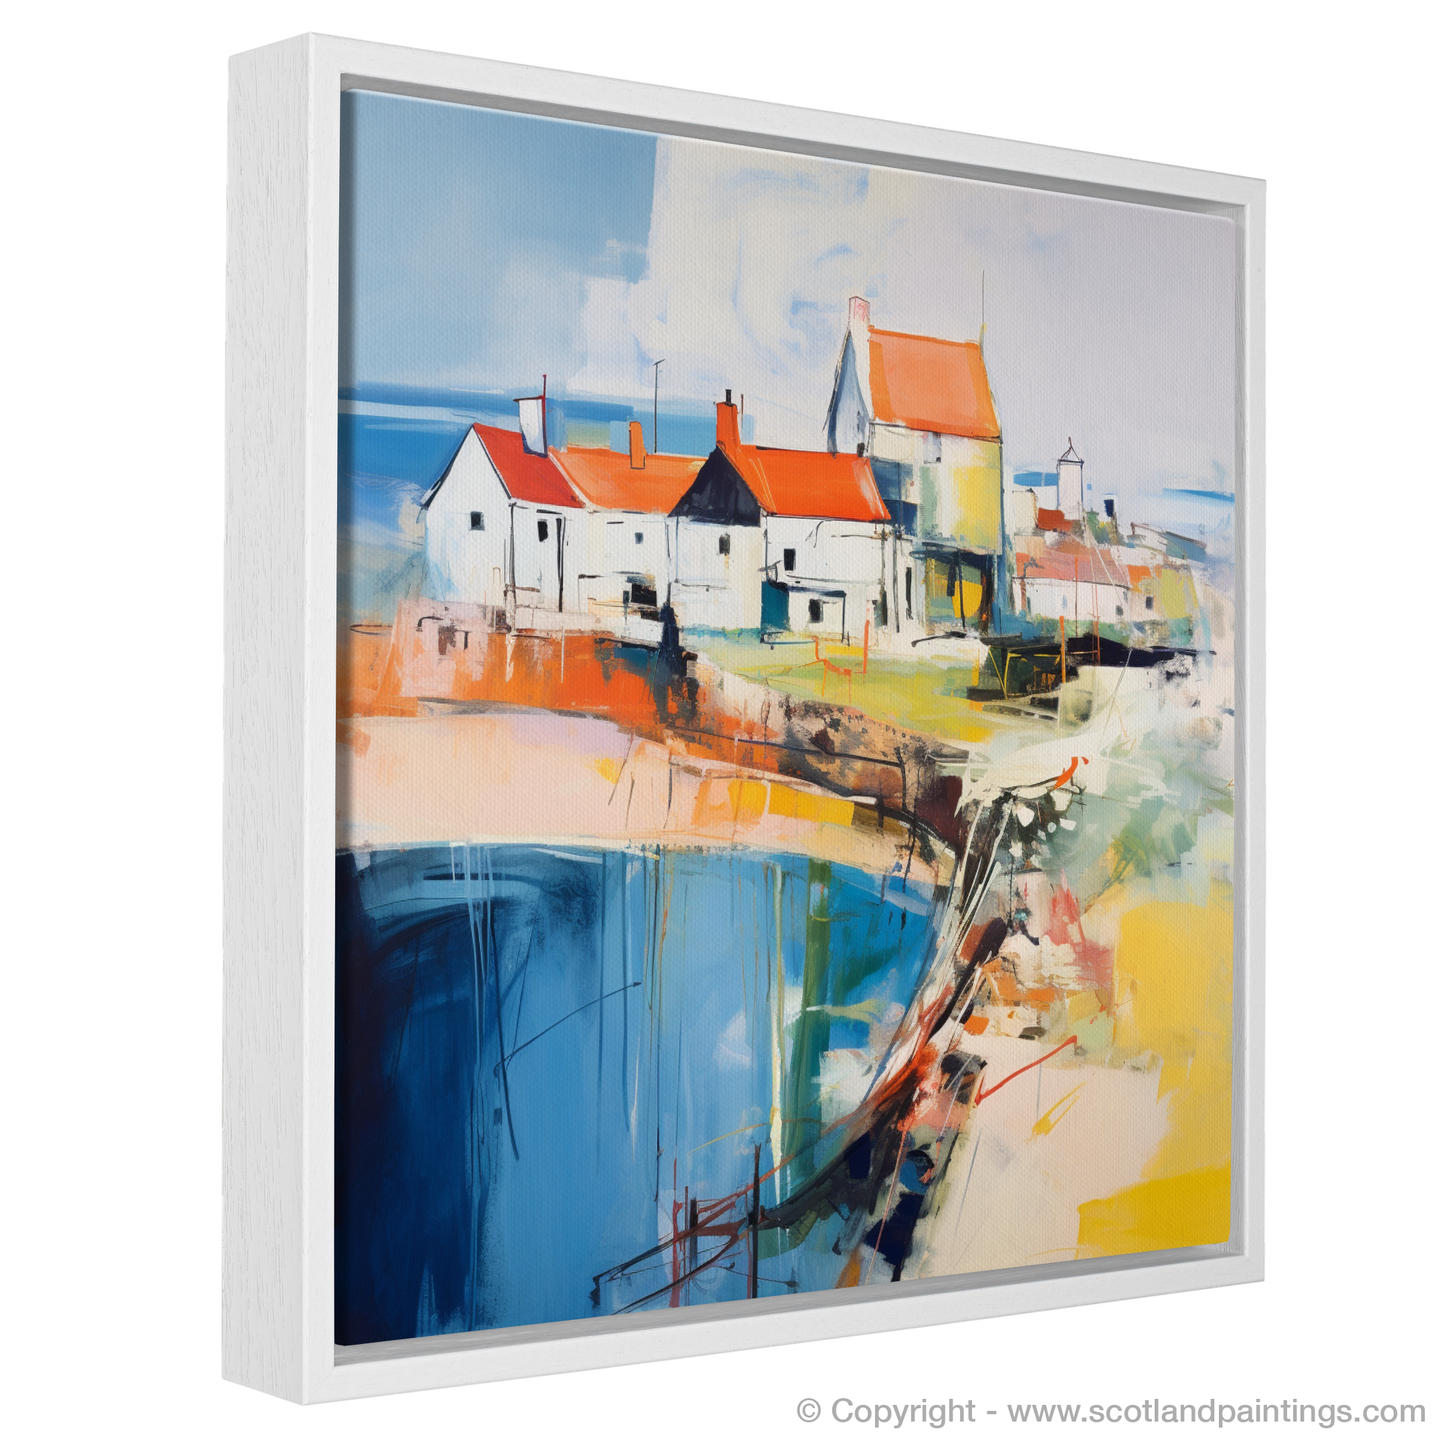 Crail Essence: An Abstract Ode to Scottish Village Charm